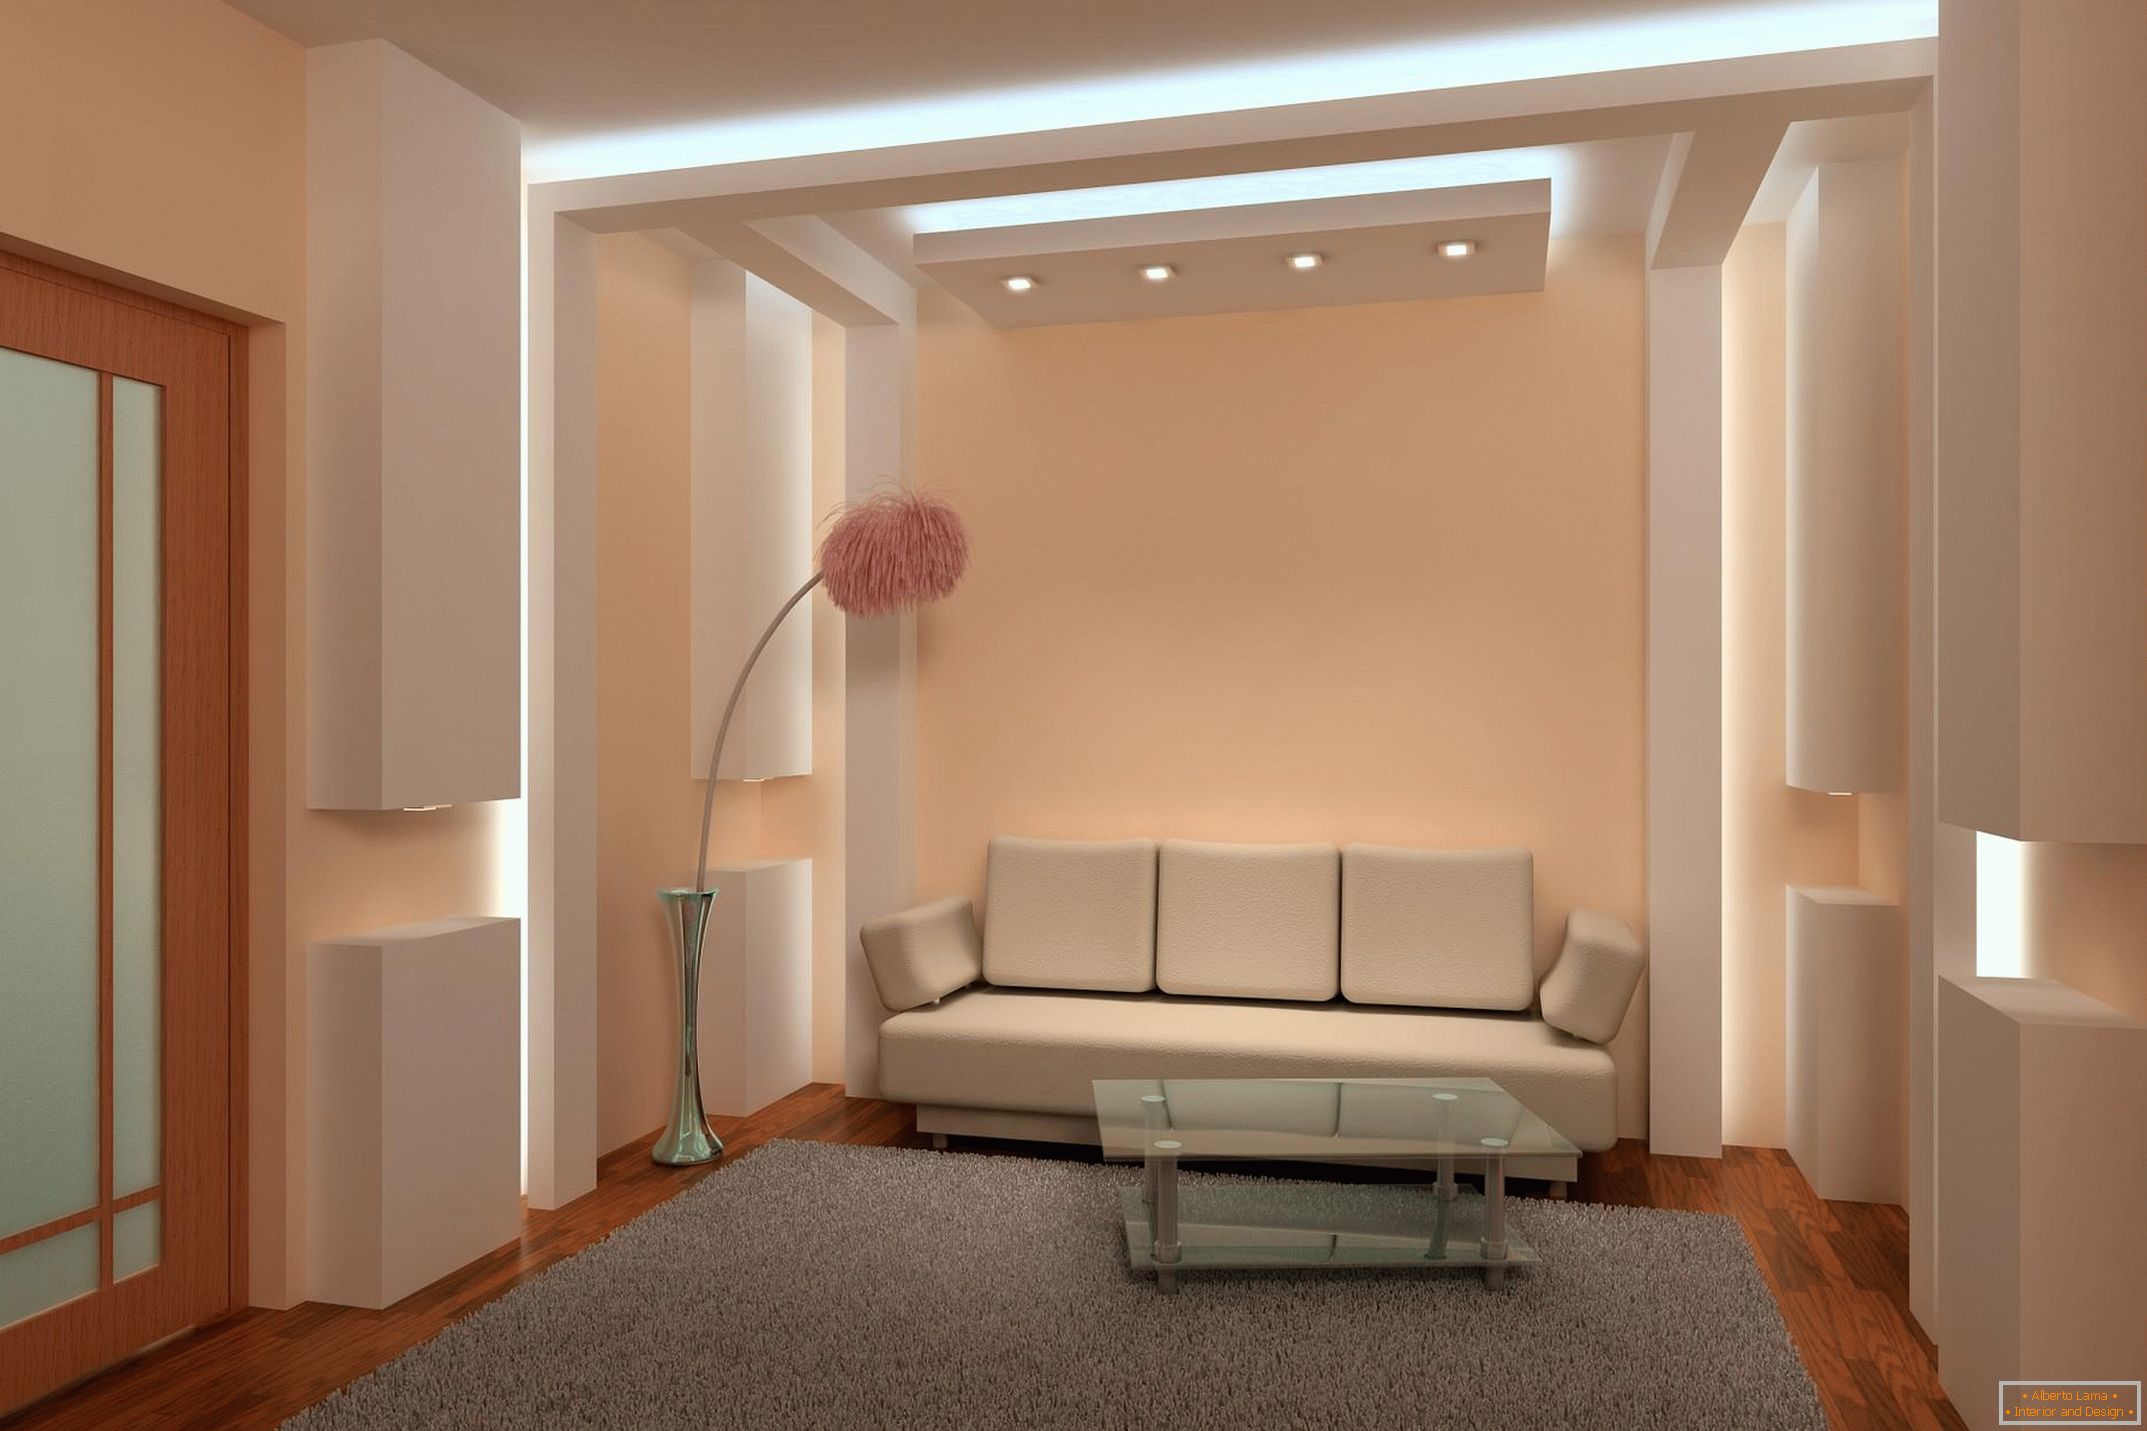 Zoning the room with light